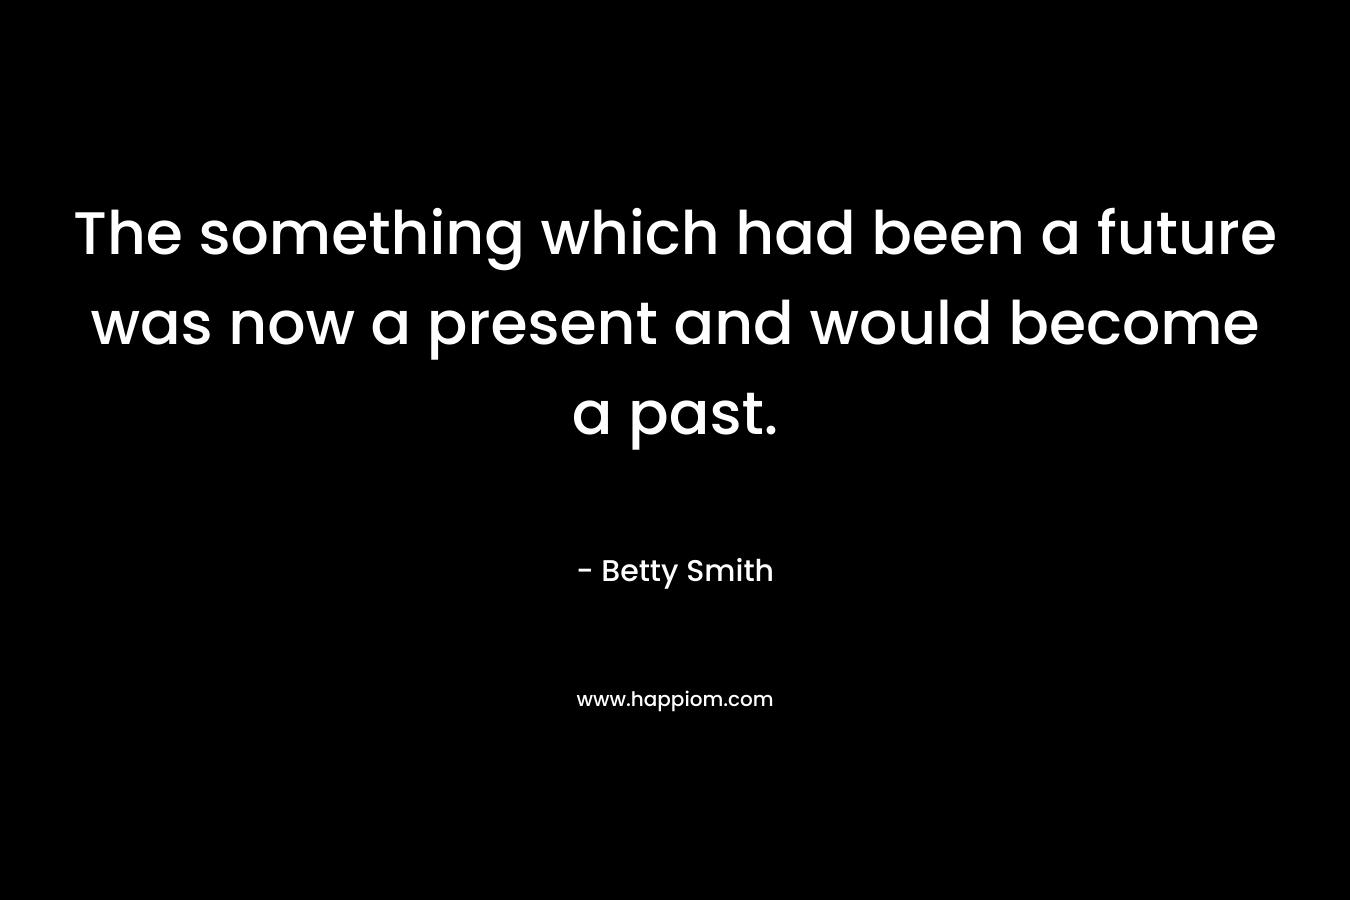 The something which had been a future was now a present and would become a past.